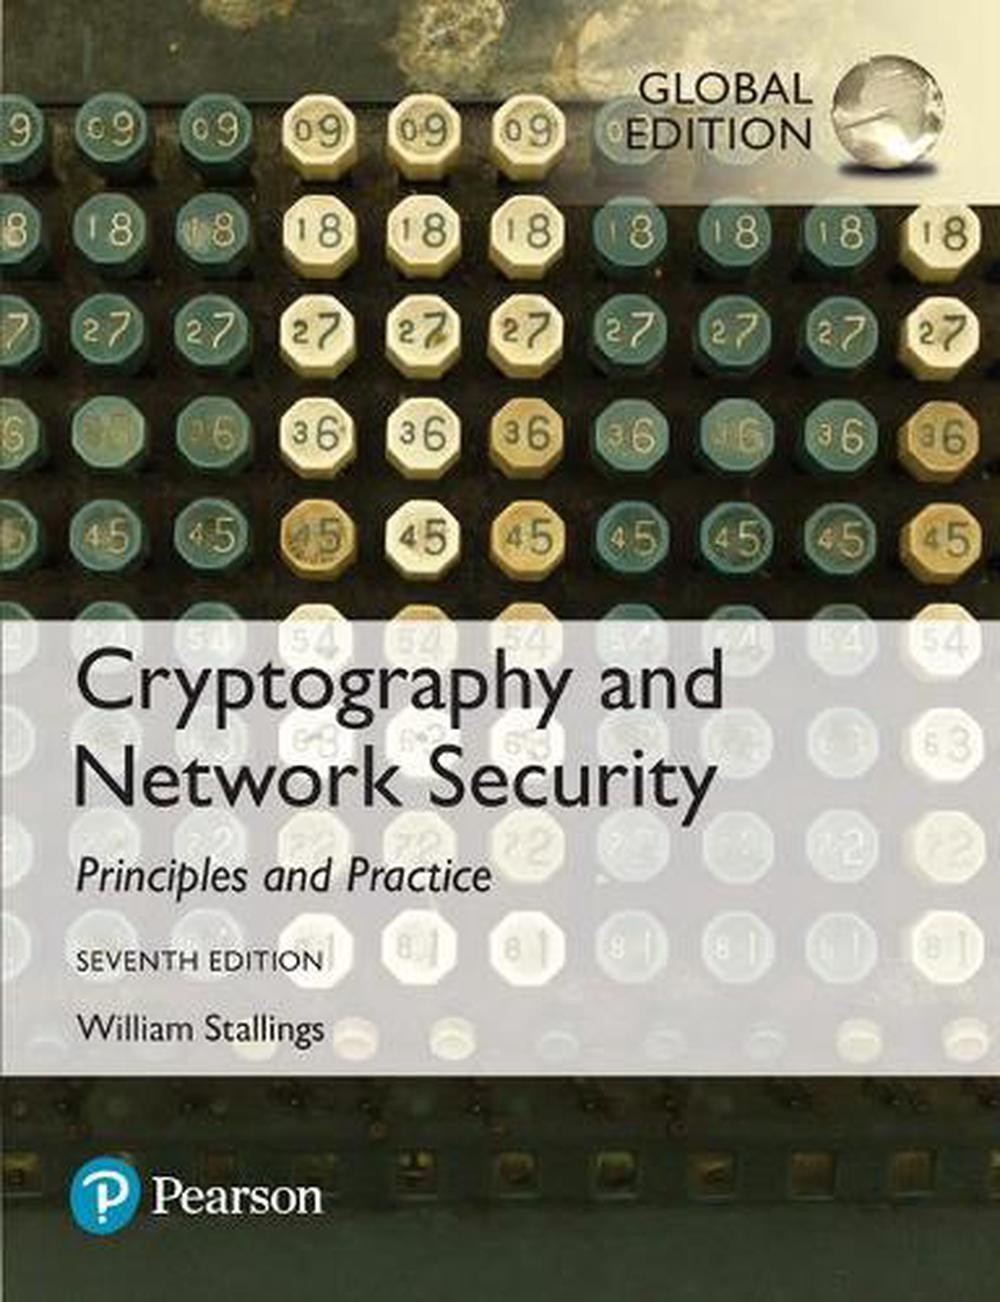 research papers on cryptography and network security